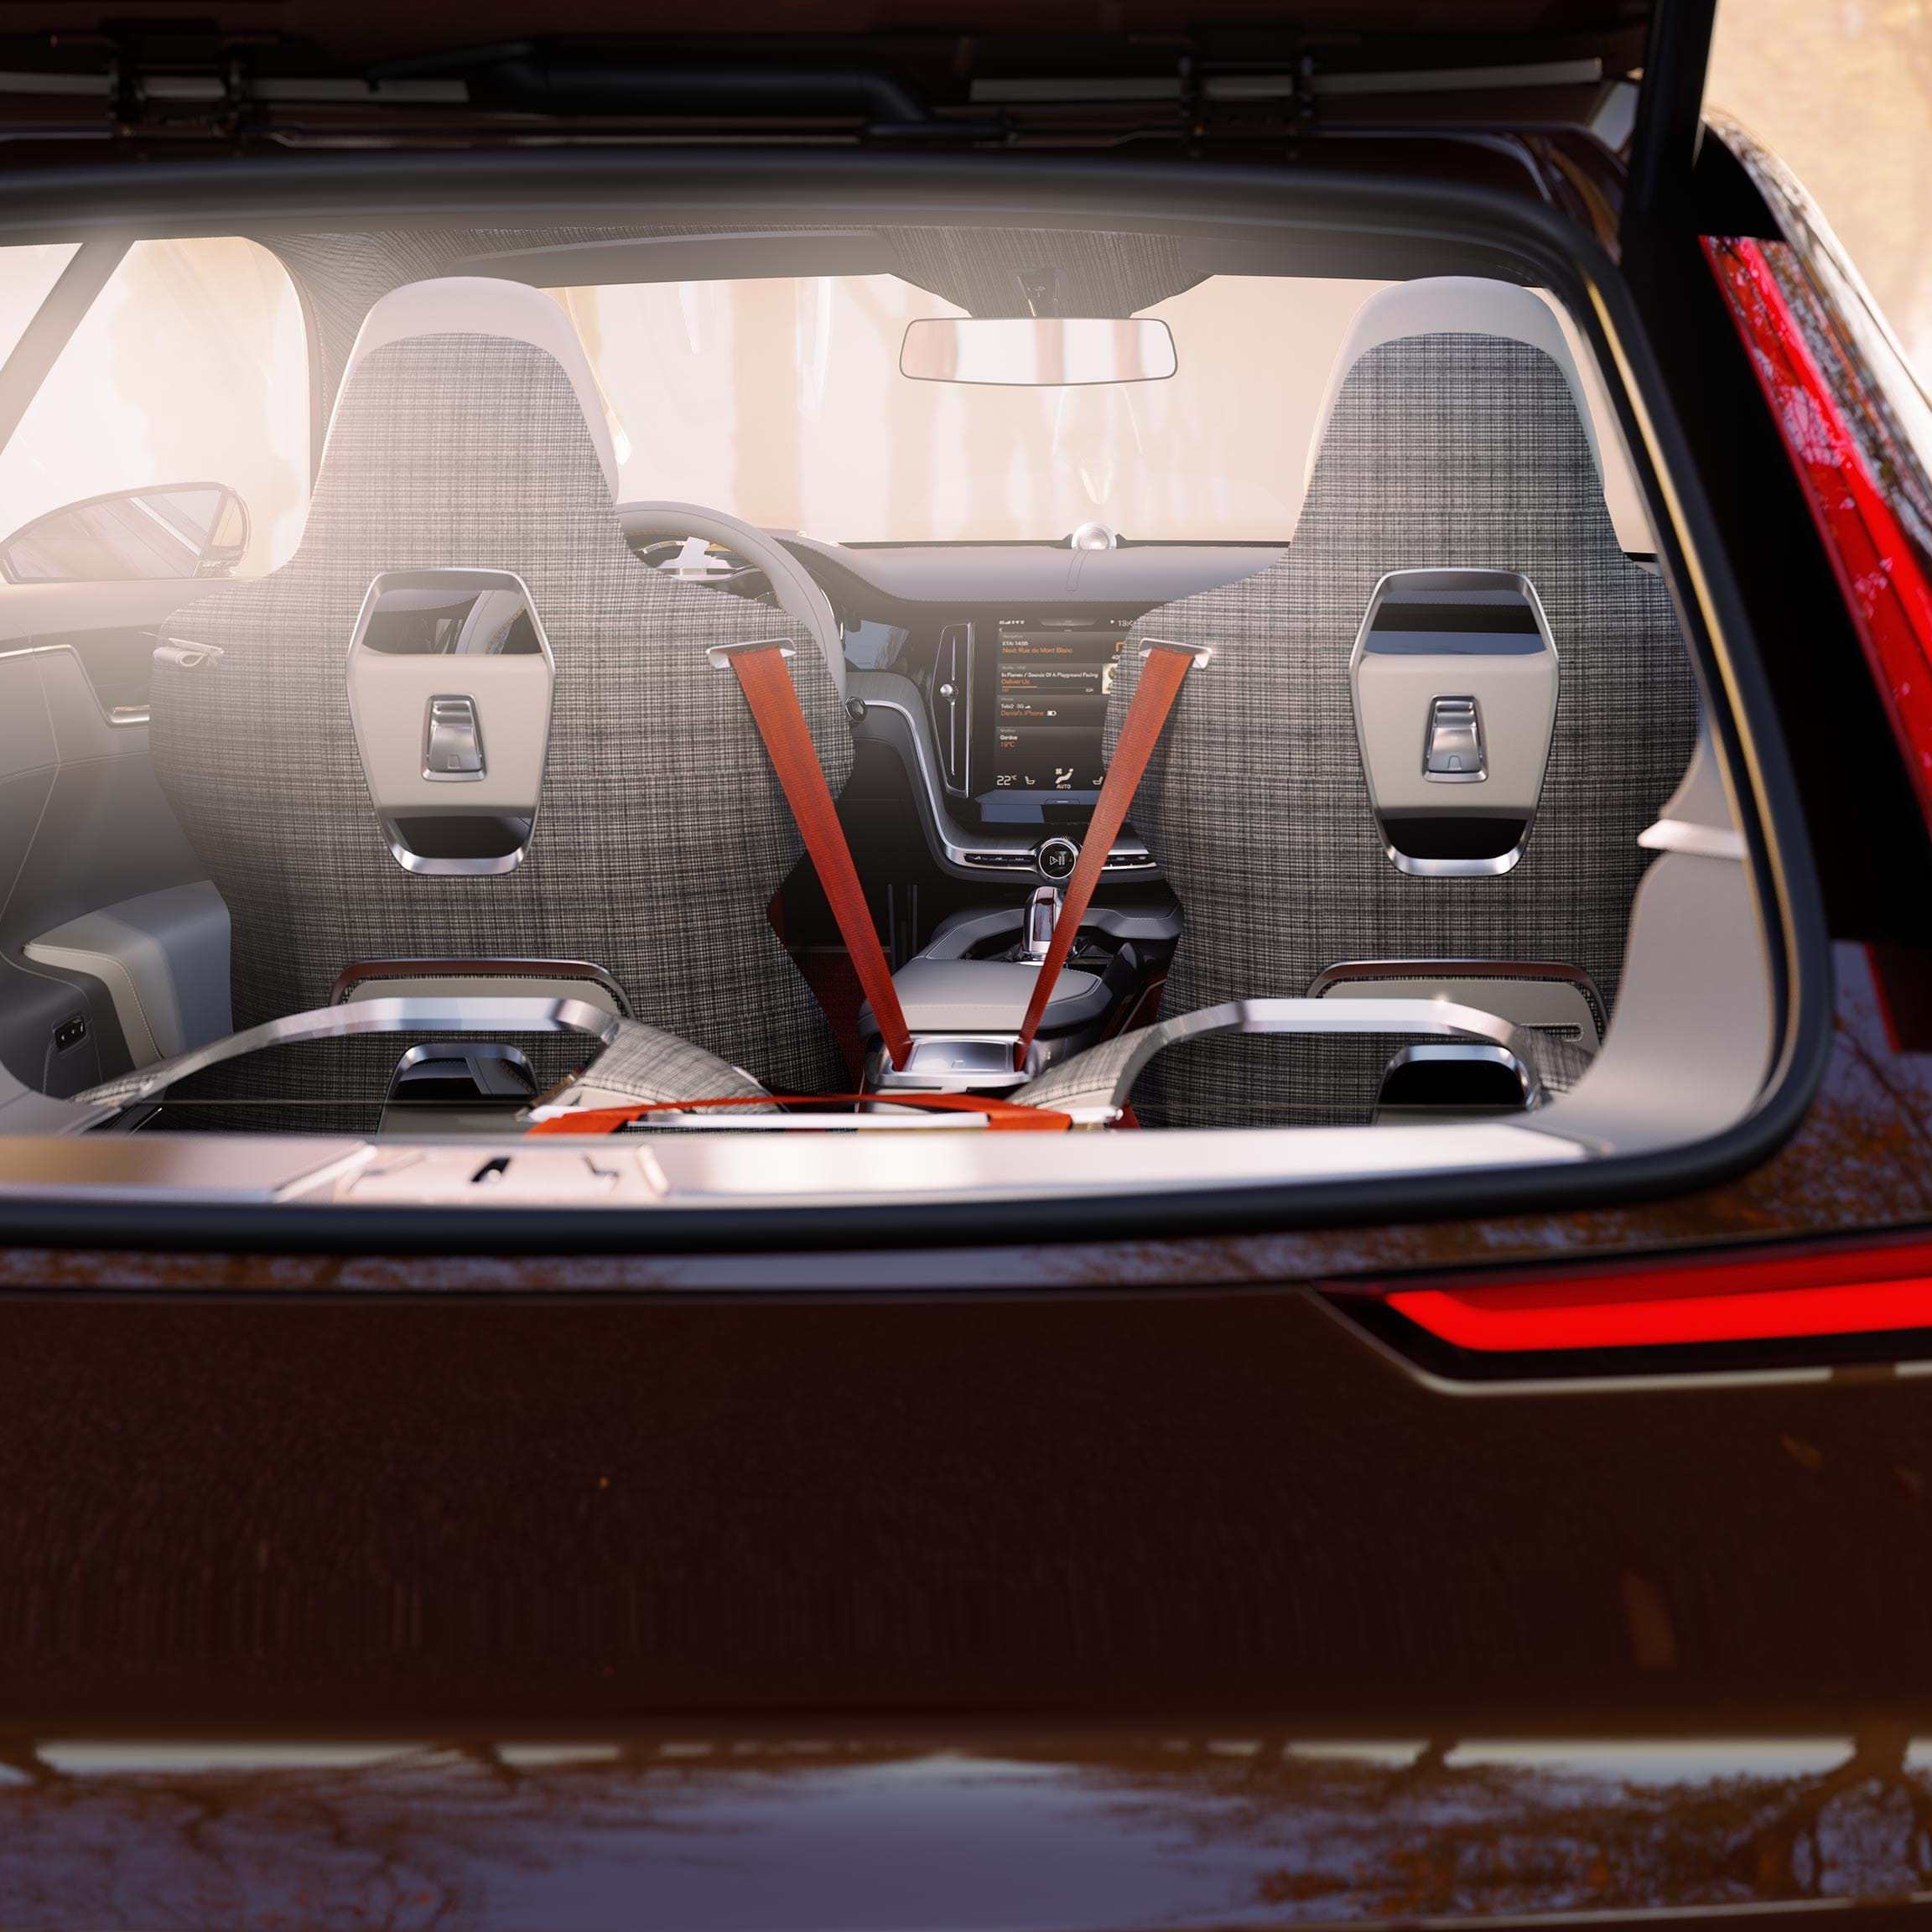 Rear of Volvo Concept Estate with luggage space door open